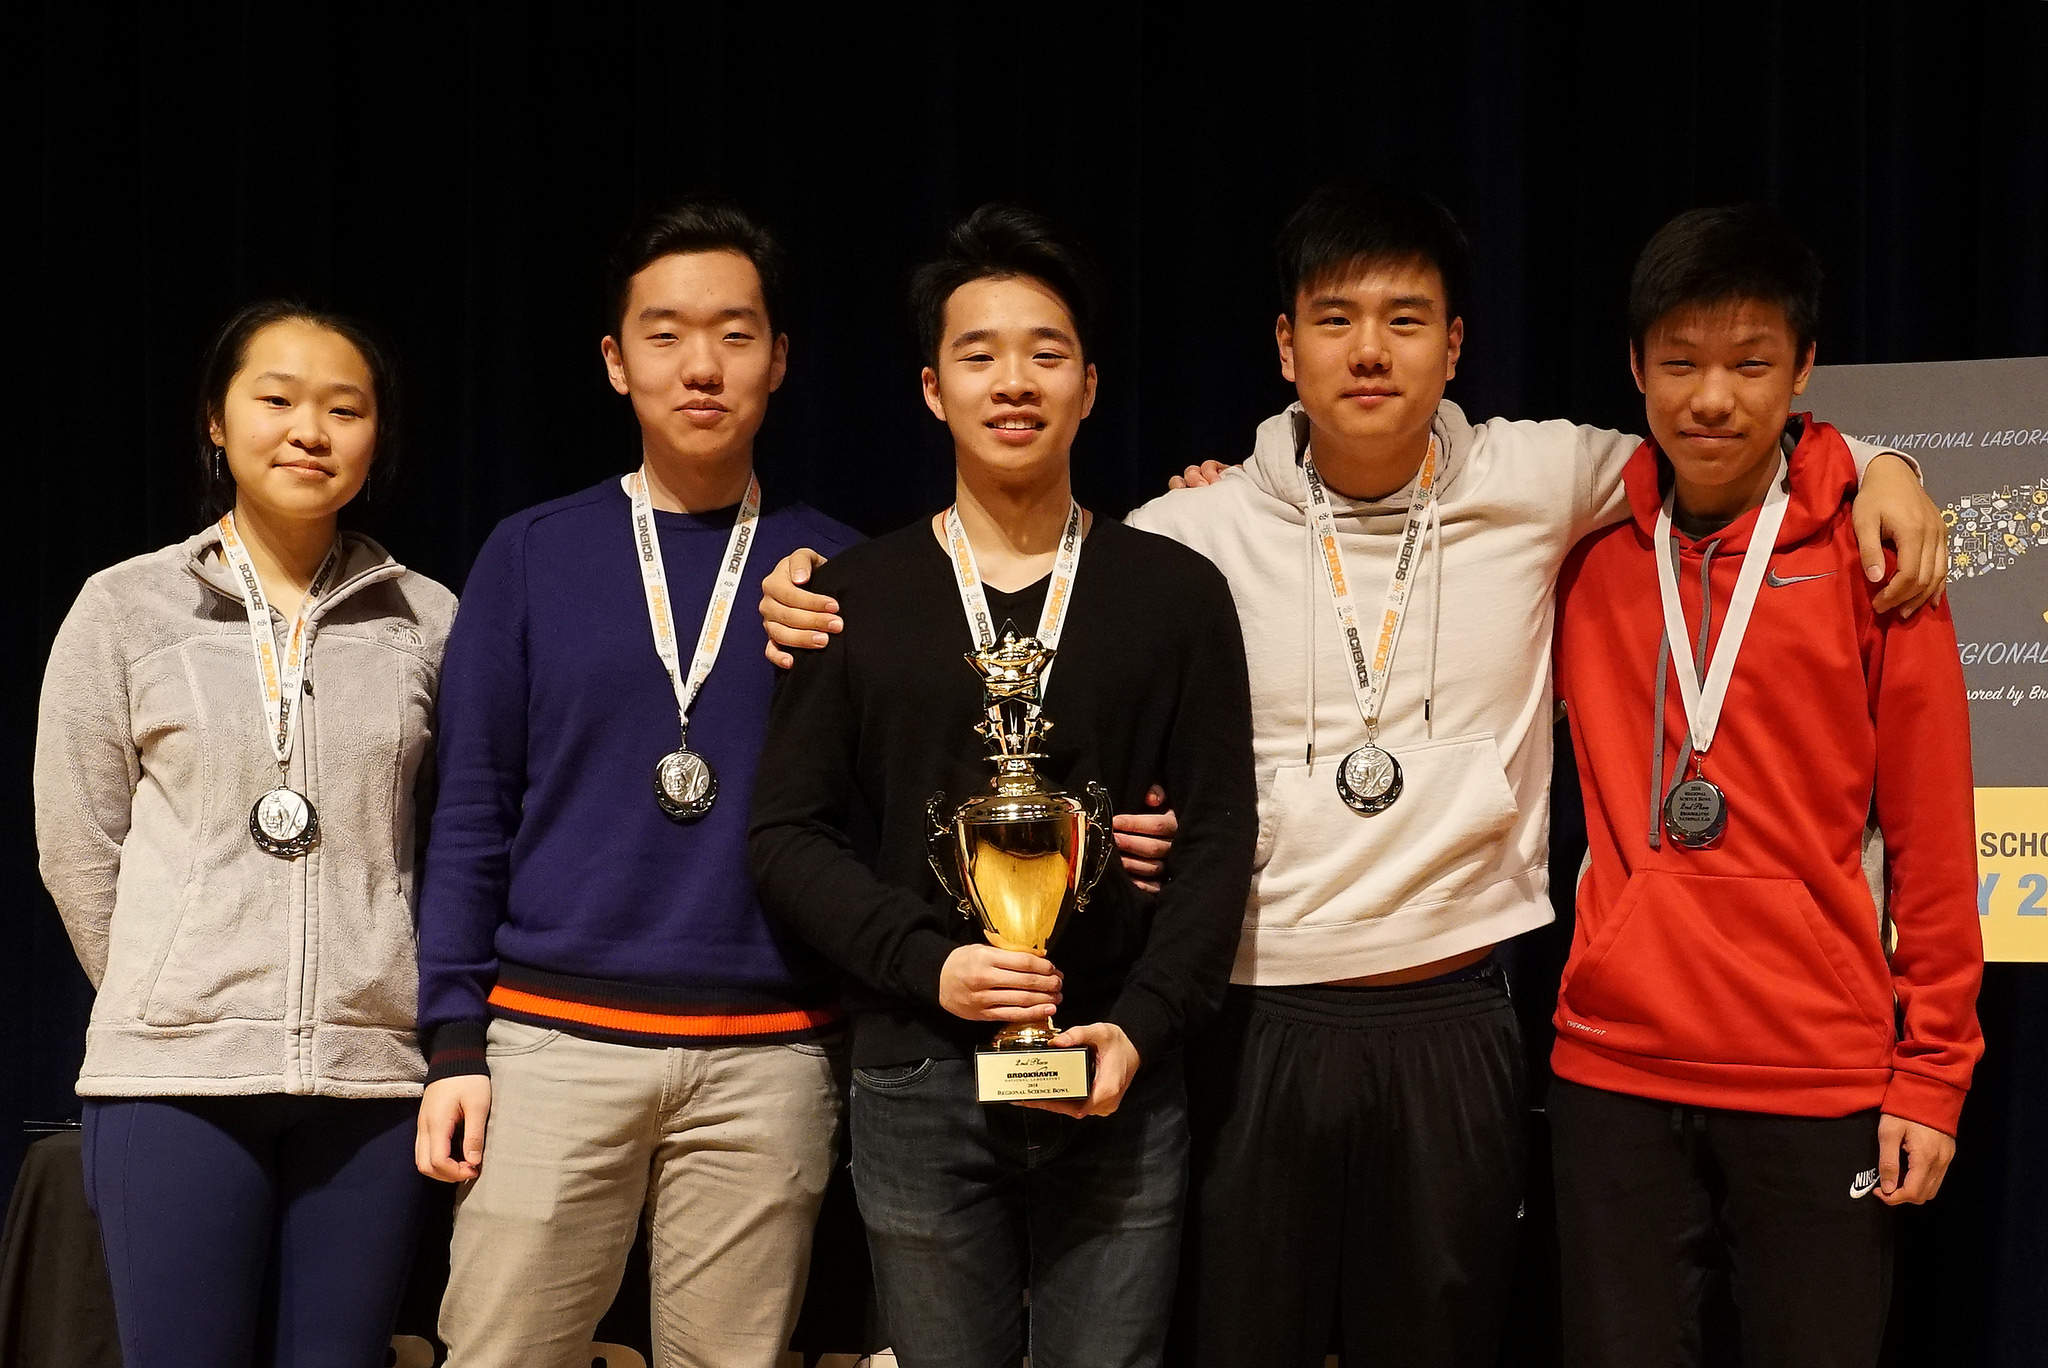 The South High team with their Regional Science Bowl trophy. (Photo courtesy of Brookhaven National Laboratory)